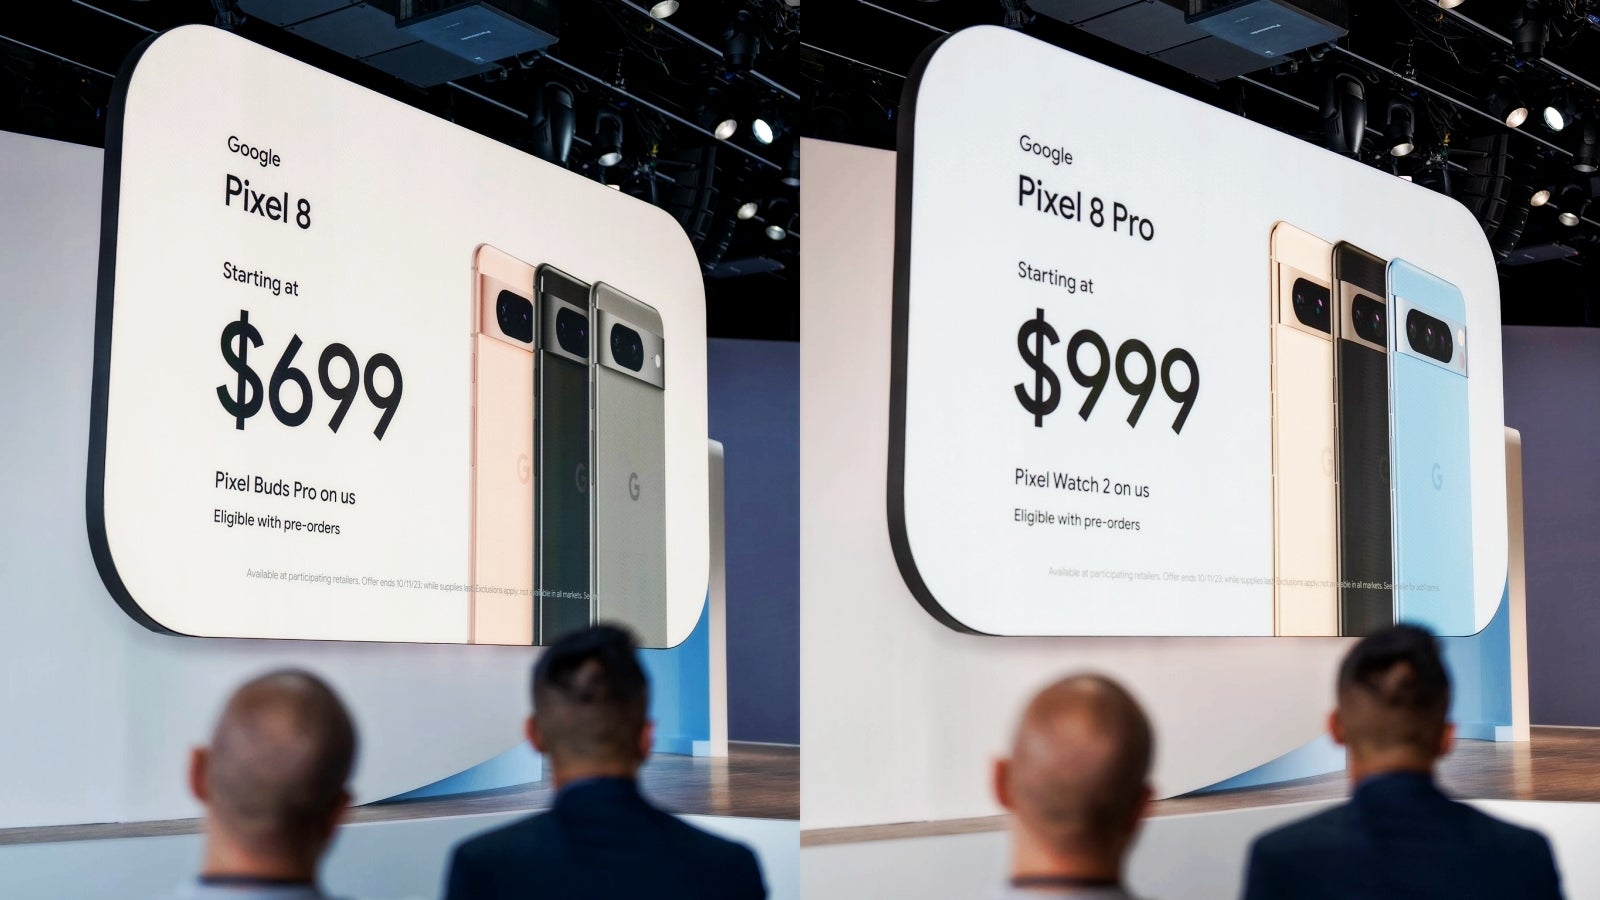 The Pixel 8 and Pixel 8 Pro are well worth the extra $100 this year. - Pixel 8 Pro: The AI Android gives Samsung and Apple a lesson on making exciting phones